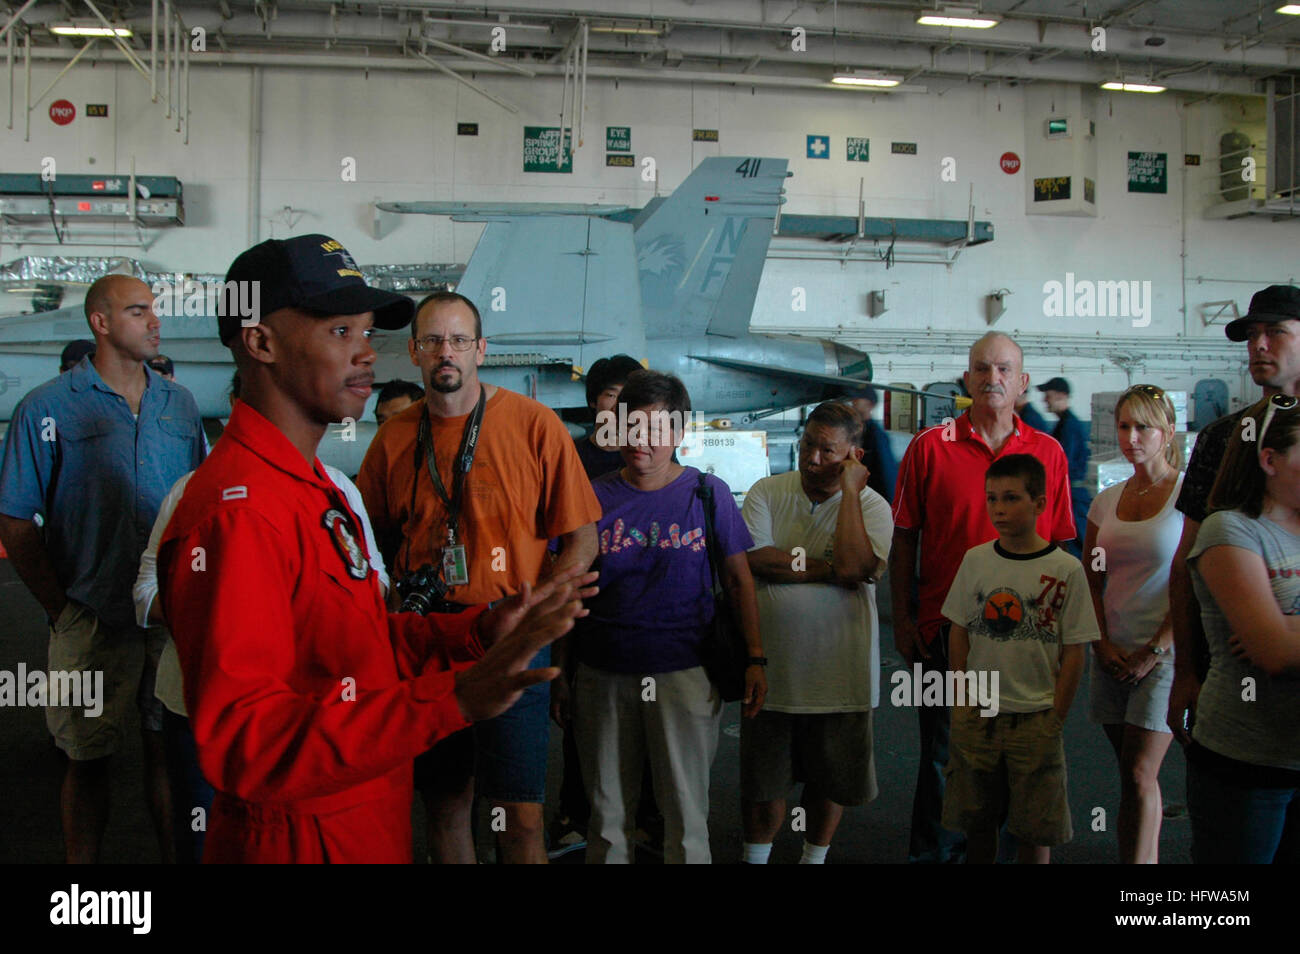 080704-N-2757S-015 PEARL HARBOR, Hawaii (July 4, 2008) Lt. Jameel McDaniel, assigned to Helicopter Anti-Submarine Squadron Light (HSL) 51, talks to a group of visitors during a tour in the hangar bay of the aircraft carrier USS Kitty Hawk (CV 63). The ship is at Pearl Harbor for Rim of the Pacific (RIMPAC) 2008 with units from Australia, Chile, Japan, the Netherlands, Peru, South Korea, Singapore, and the United Kingdom.  Taking part are 35 ships, six submarines, more than 150 aircraft, and 20,000 Sailors, airmen, Marines, soldiers and Coast Guardsmen. U.S. Navy photo by Mass Communication Sea Stock Photo